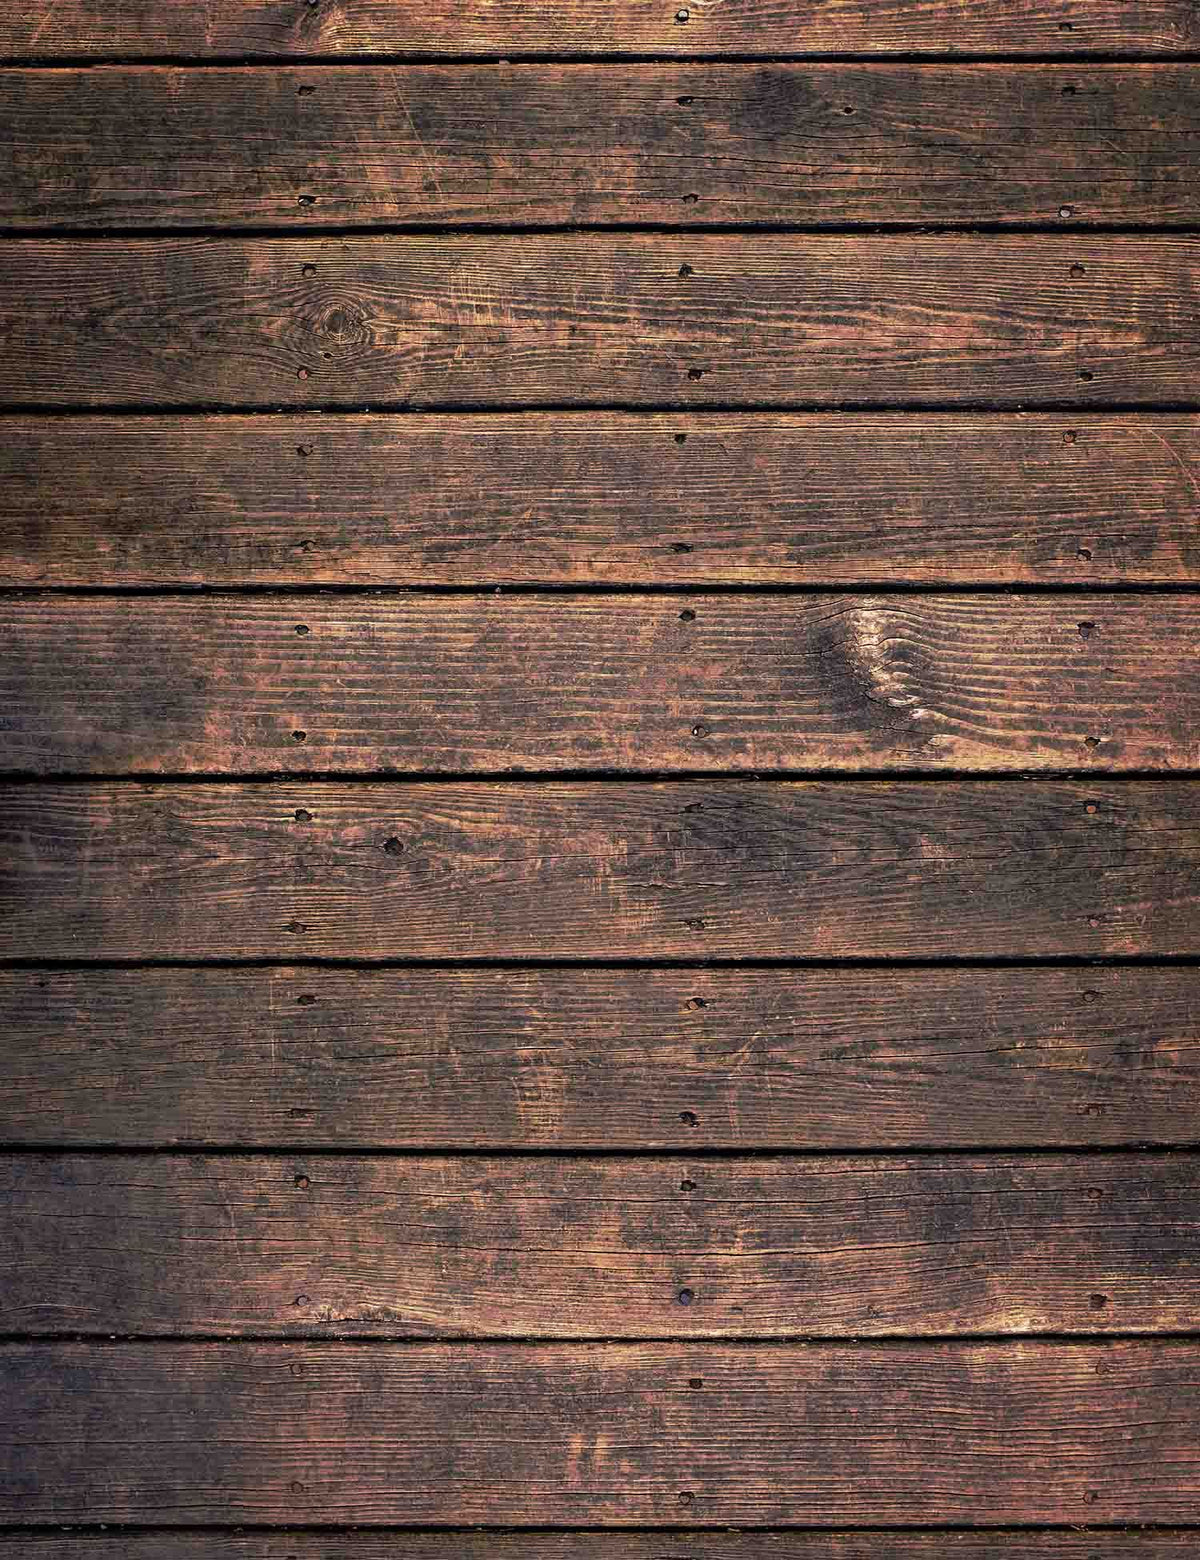 Moldy Brown Printed Wood Floor Texture Backdrop For Photography Shopbackdrop